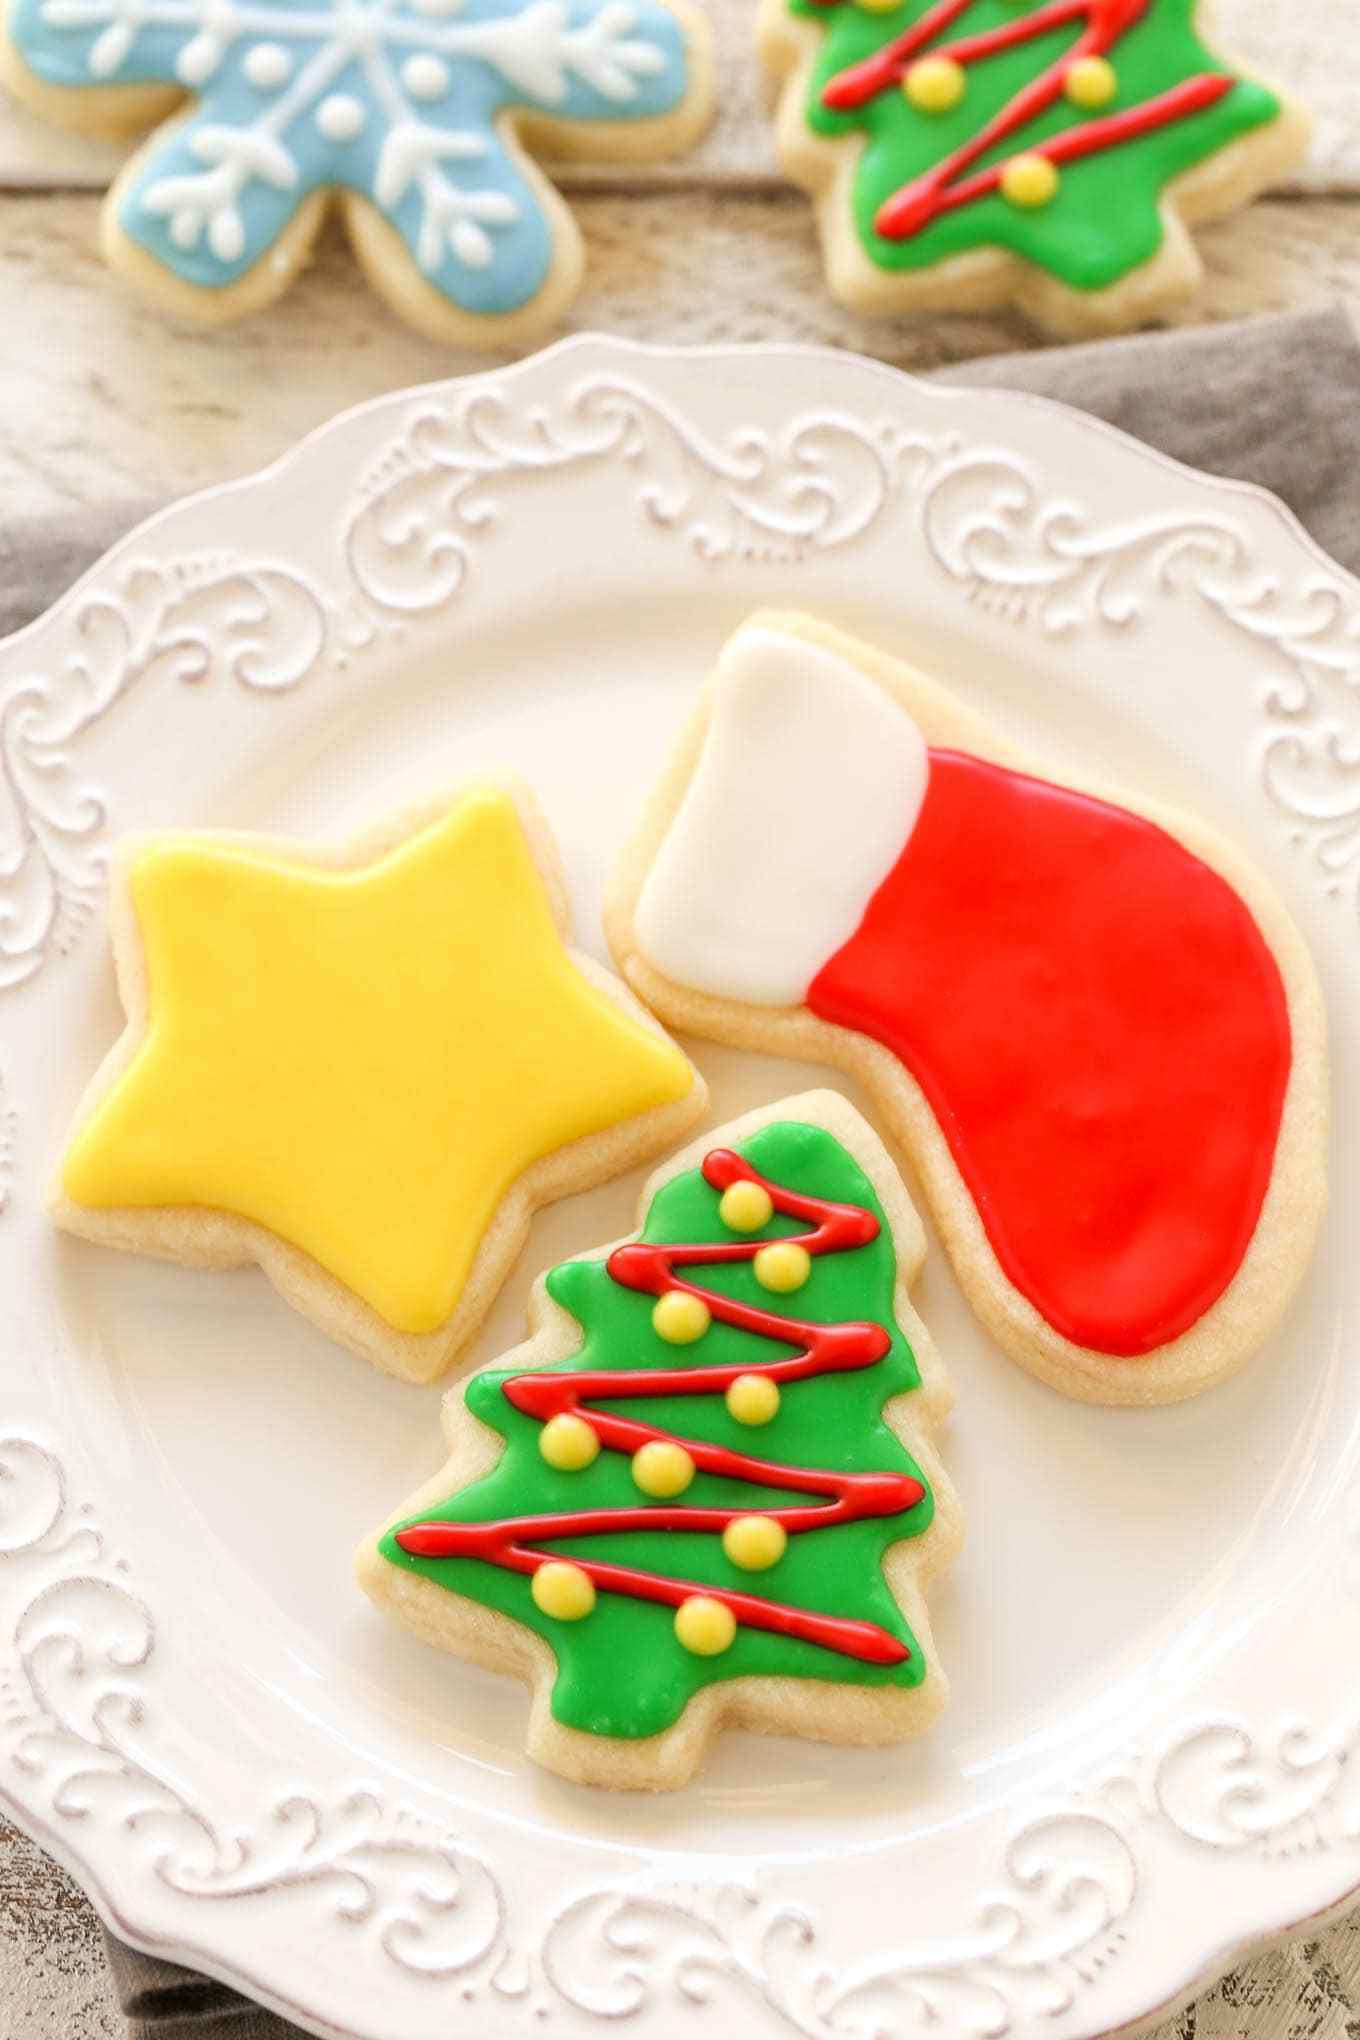 Icing For Christmas Cookies
 Soft Christmas Cut Out Sugar Cookies Live Well Bake ten